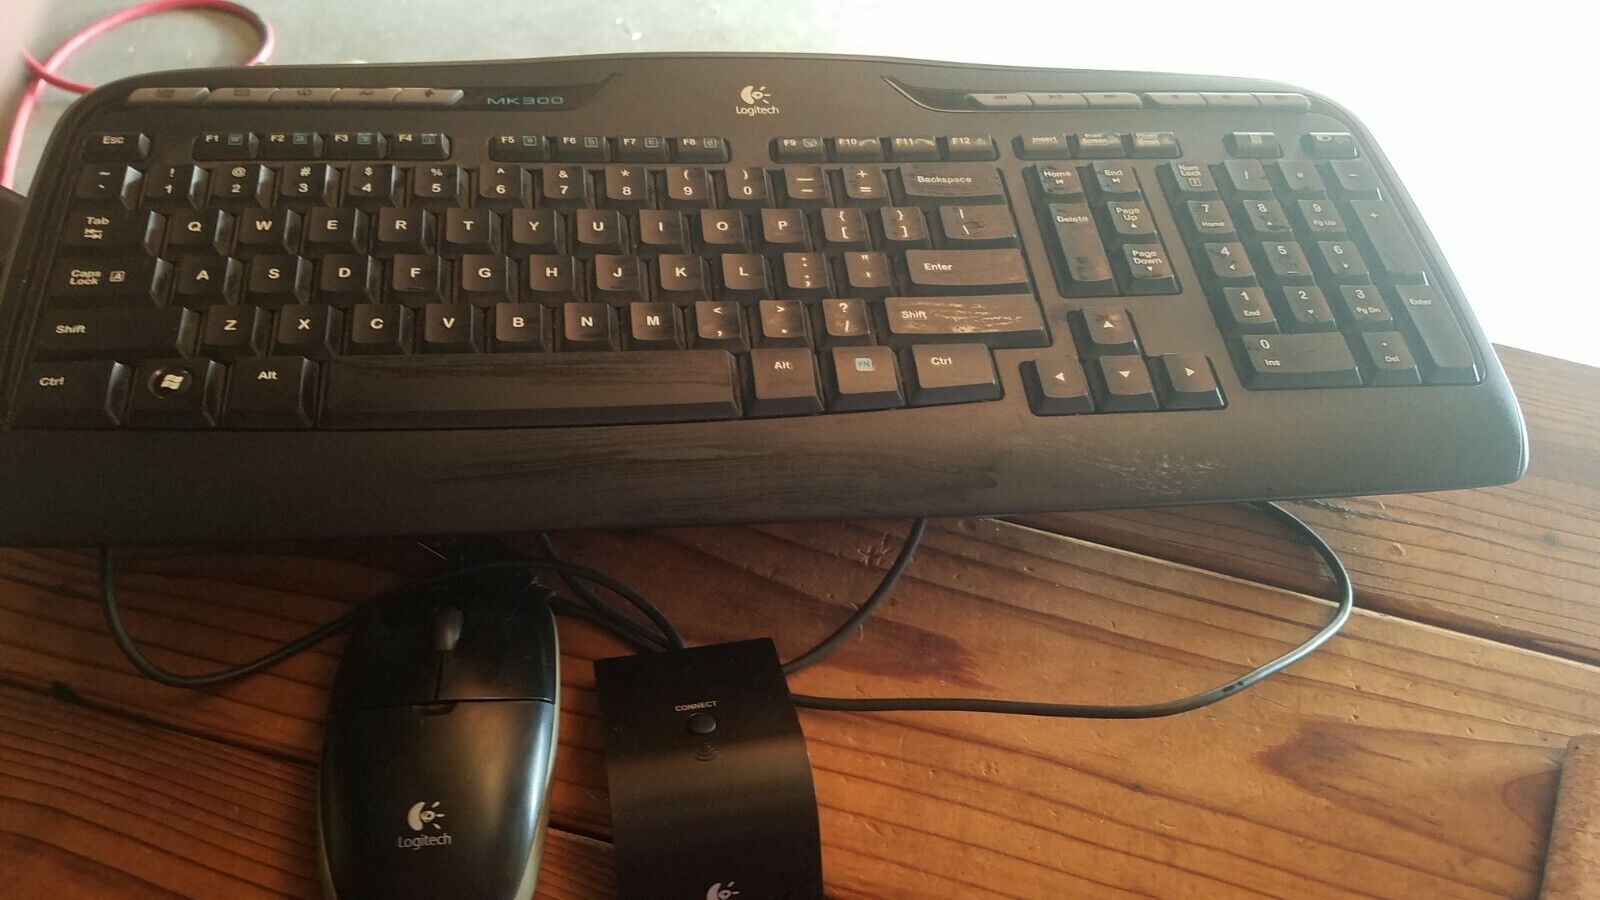 MK300 Wireless Keyboard With Mouse USB Receiver 97855057112 | eBay